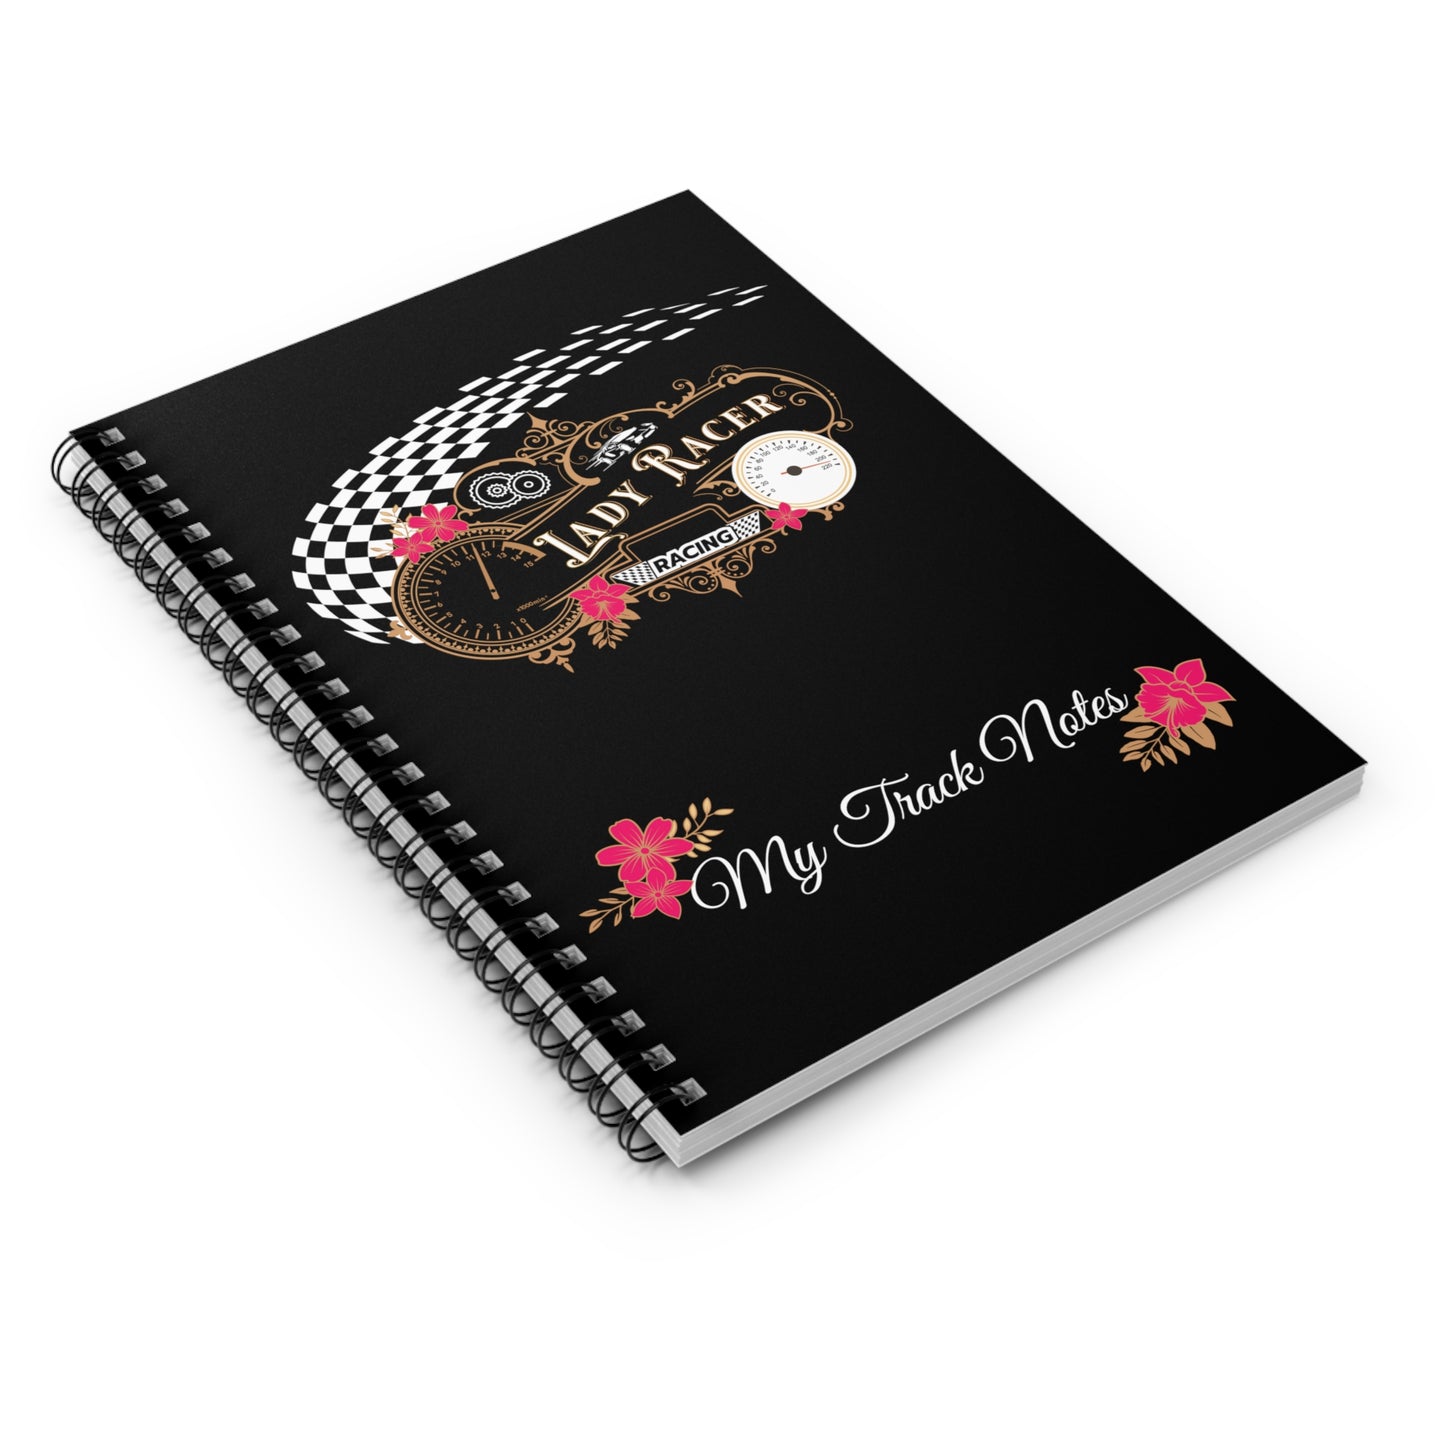 Spiral Notebook - Ruled Line - Lady Racer